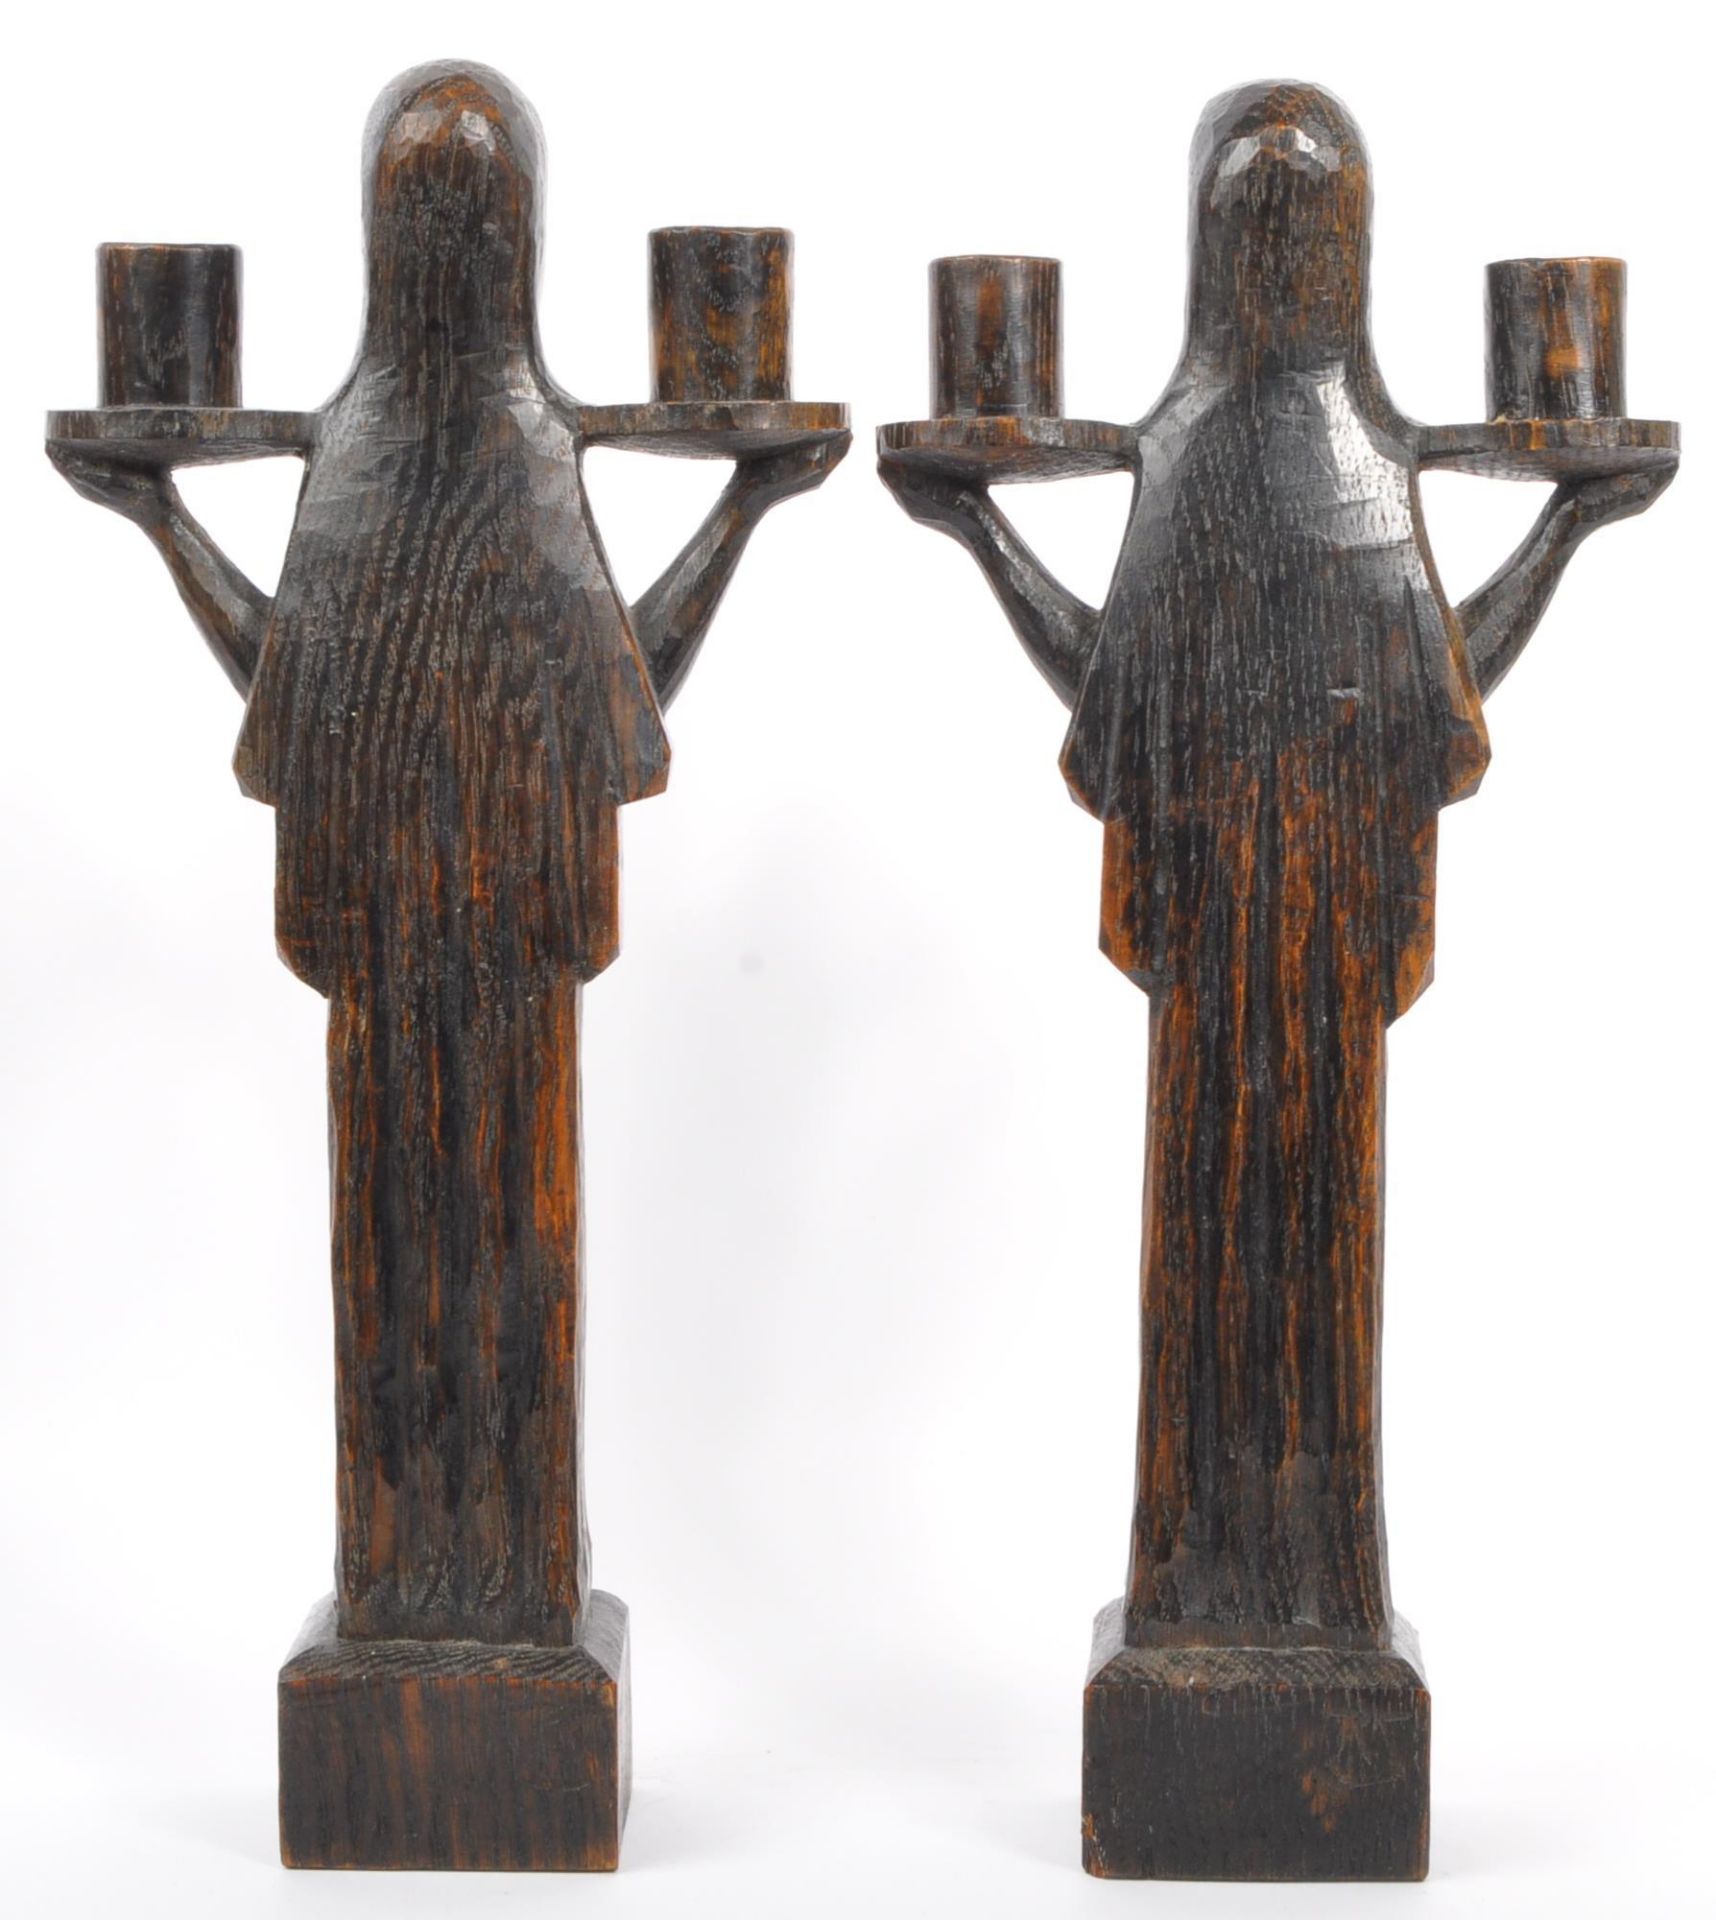 PAIR OF 20TH CENTURY HAND CARVED WOODEN CANDLESTICKS - Image 3 of 6